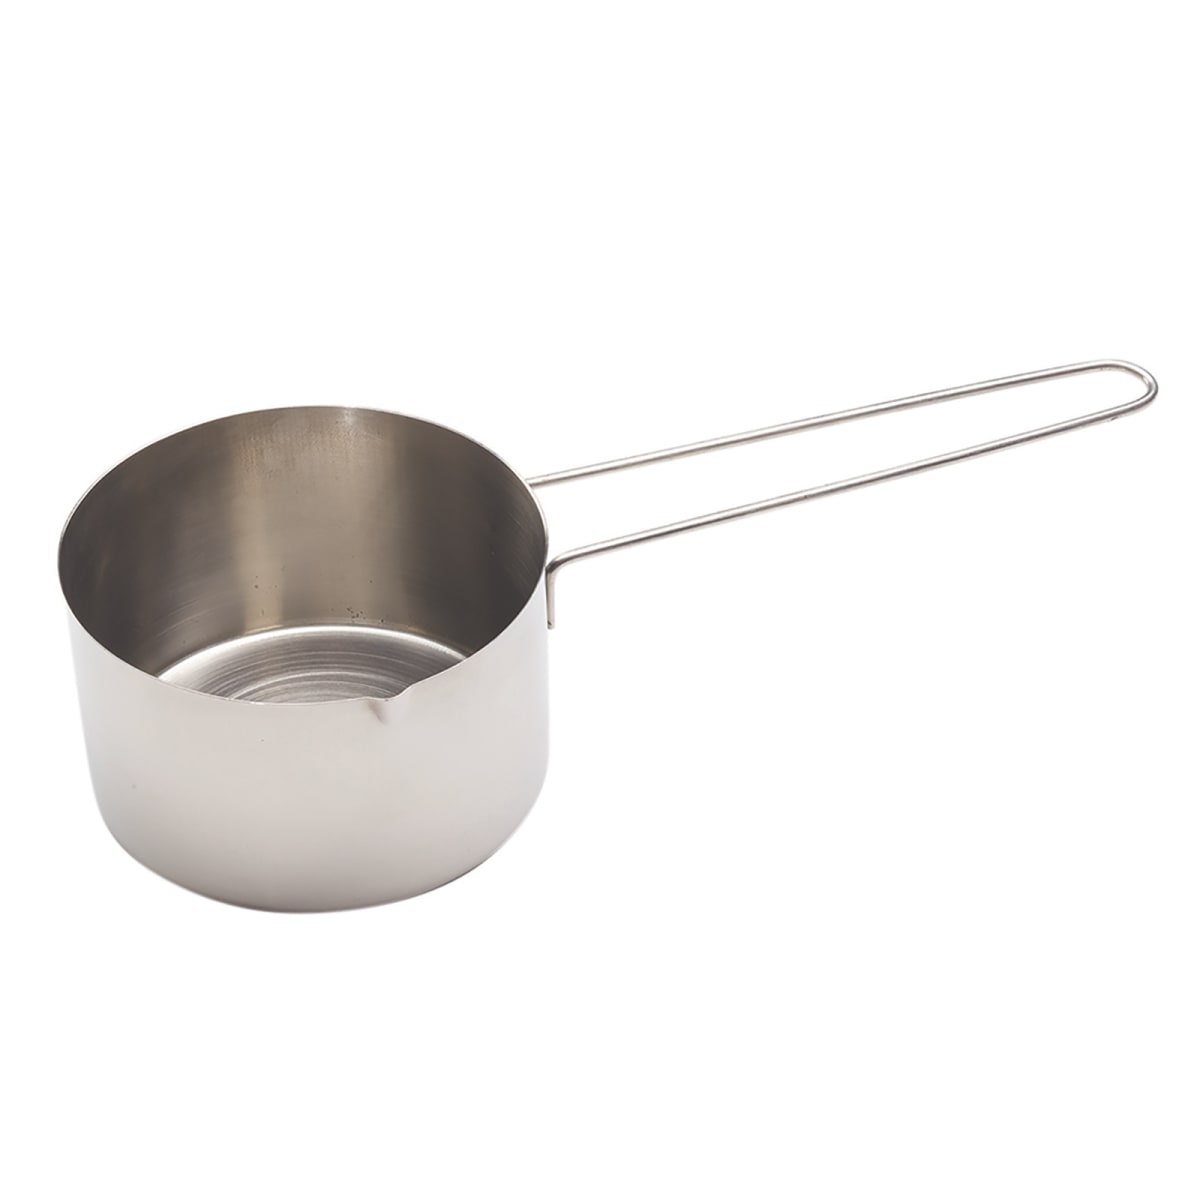 American Metalcraft MCL150 S/S 1.5 Cup Measuring Cup with Handle